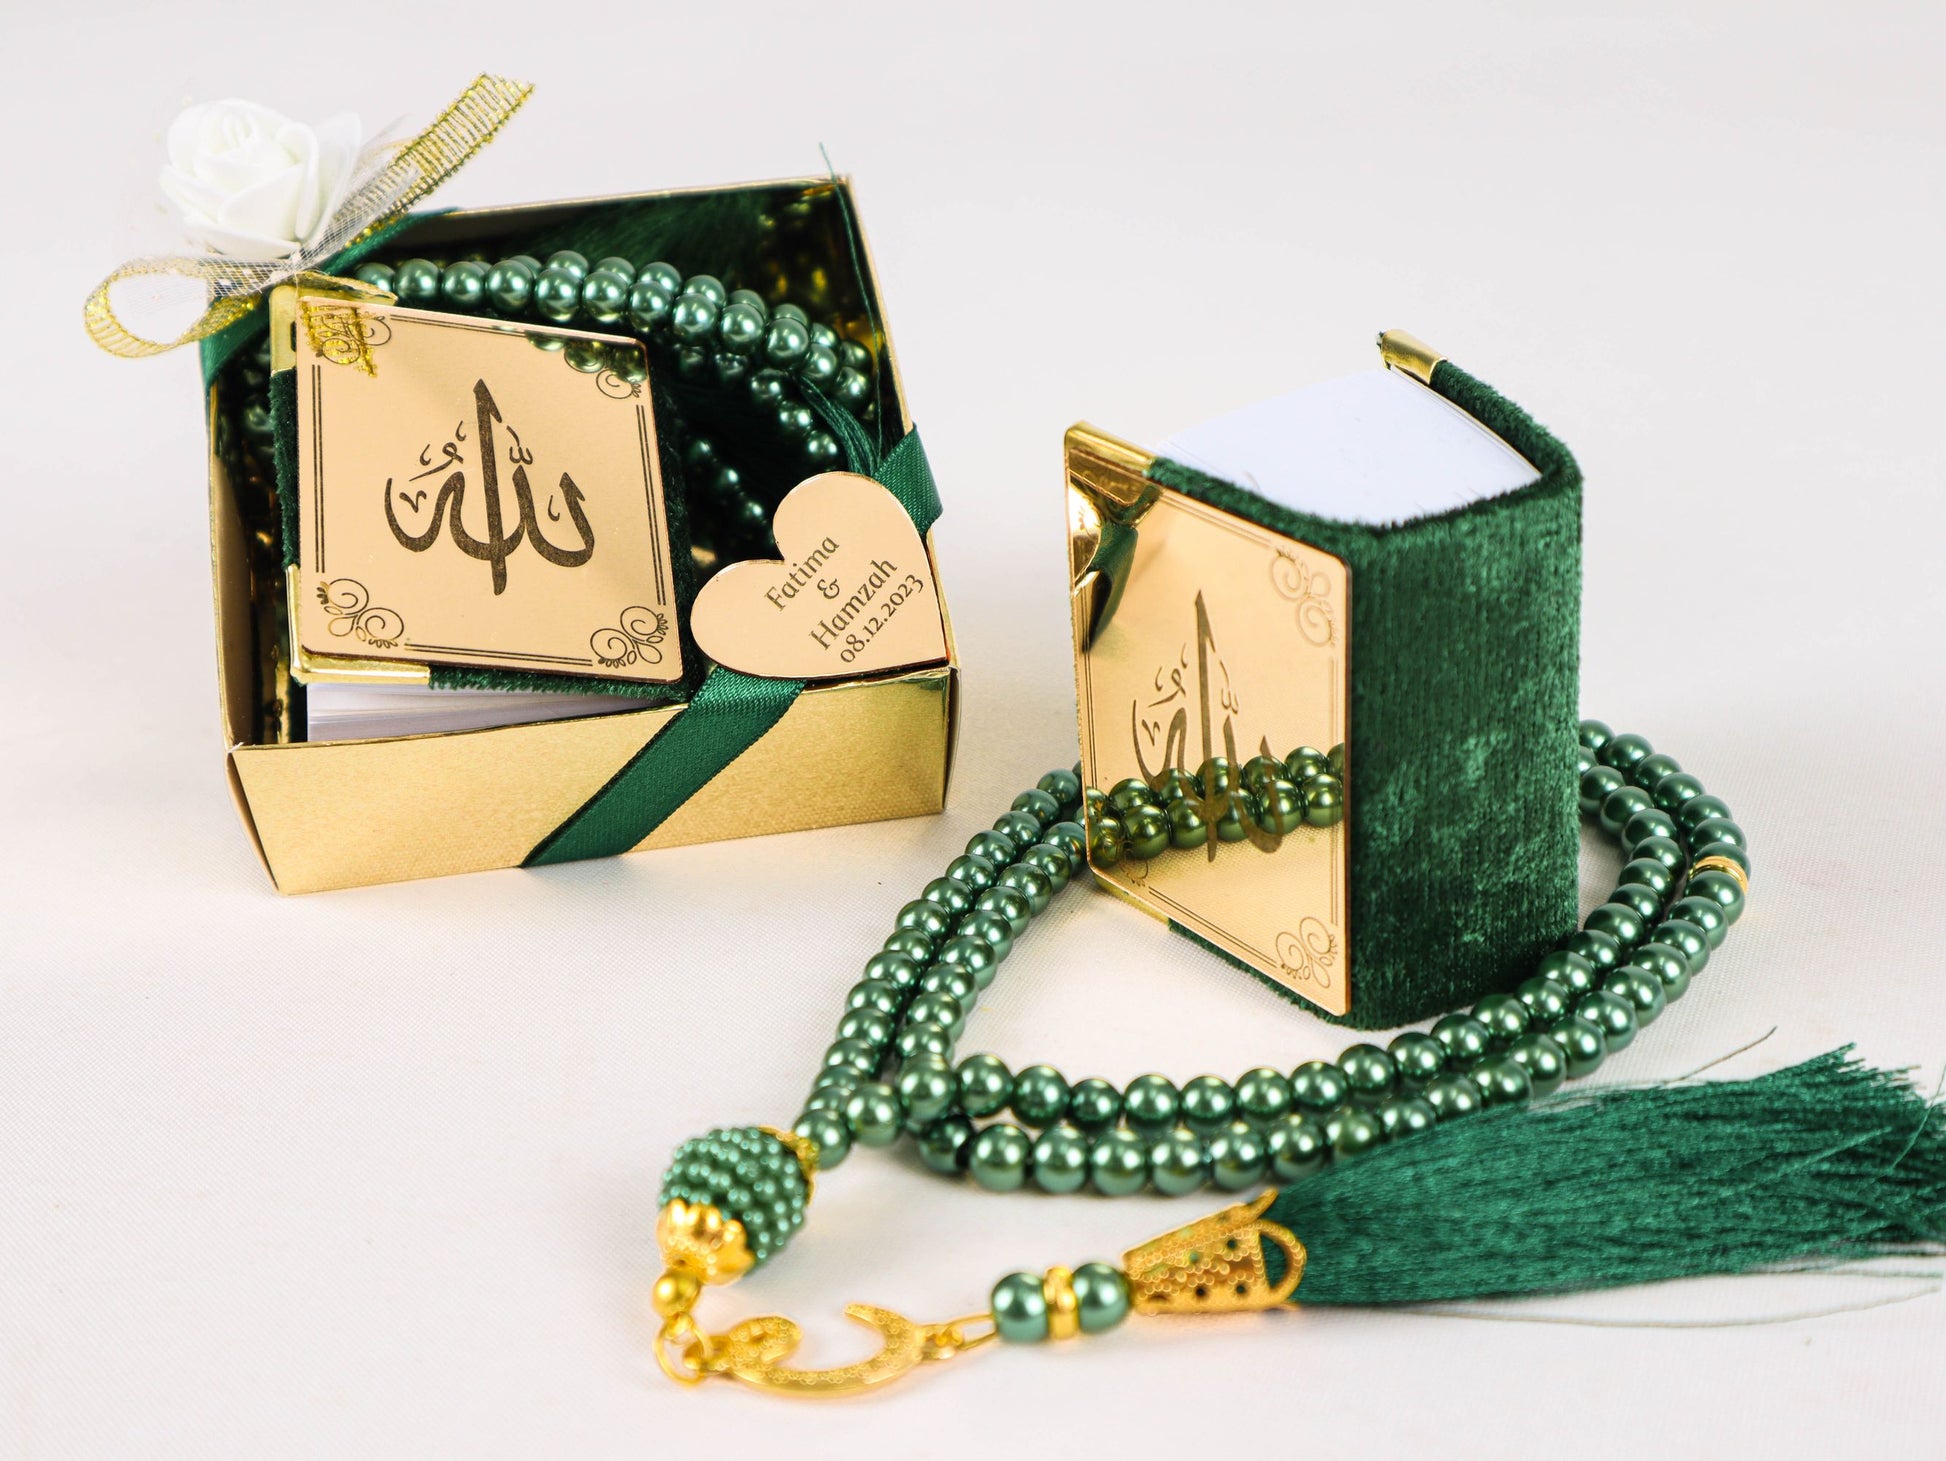 Personalized Mini Quran Pearl Tasbeeh Allah Calligraphy Wedding Favor - Islamic Elite Favors is a handmade gift shop offering a wide variety of unique and personalized gifts for all occasions. Whether you're looking for the perfect Ramadan, Eid, Hajj, wedding gift or something special for a birthday, baby shower or anniversary, we have something for everyone. High quality, made with love.